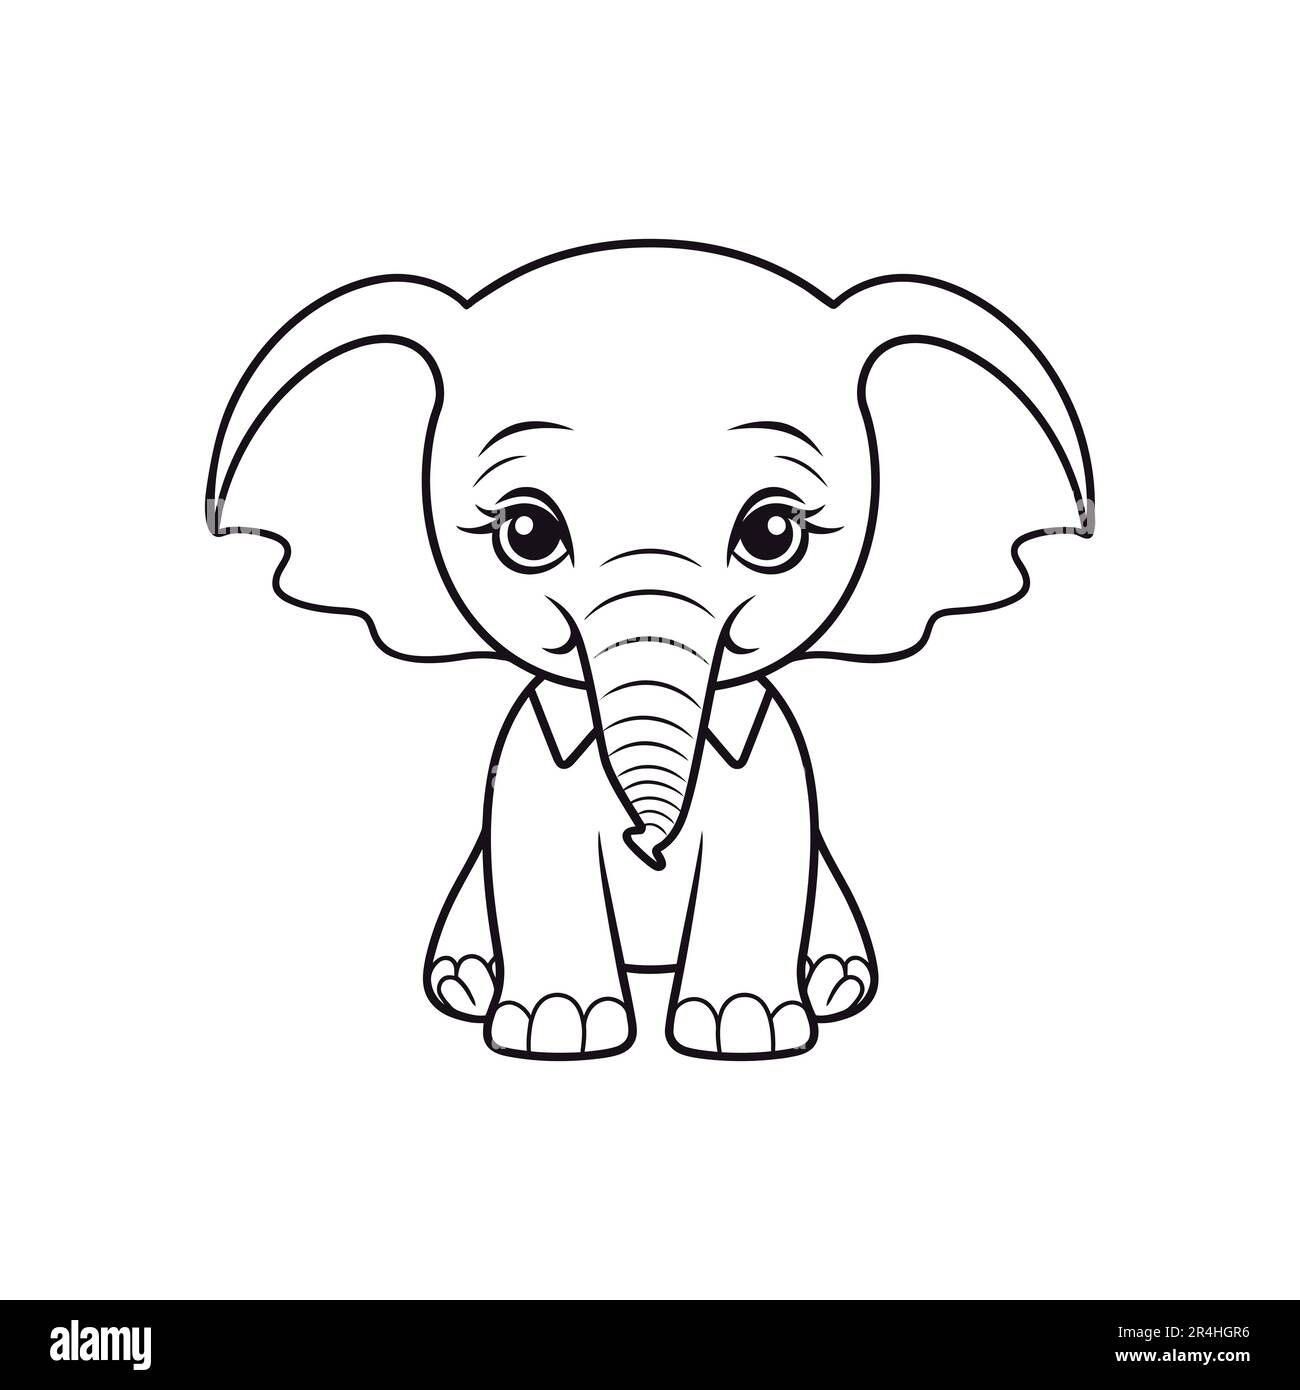 Retro style elephant outline drawing free clipart design download jpg -  Clipartix